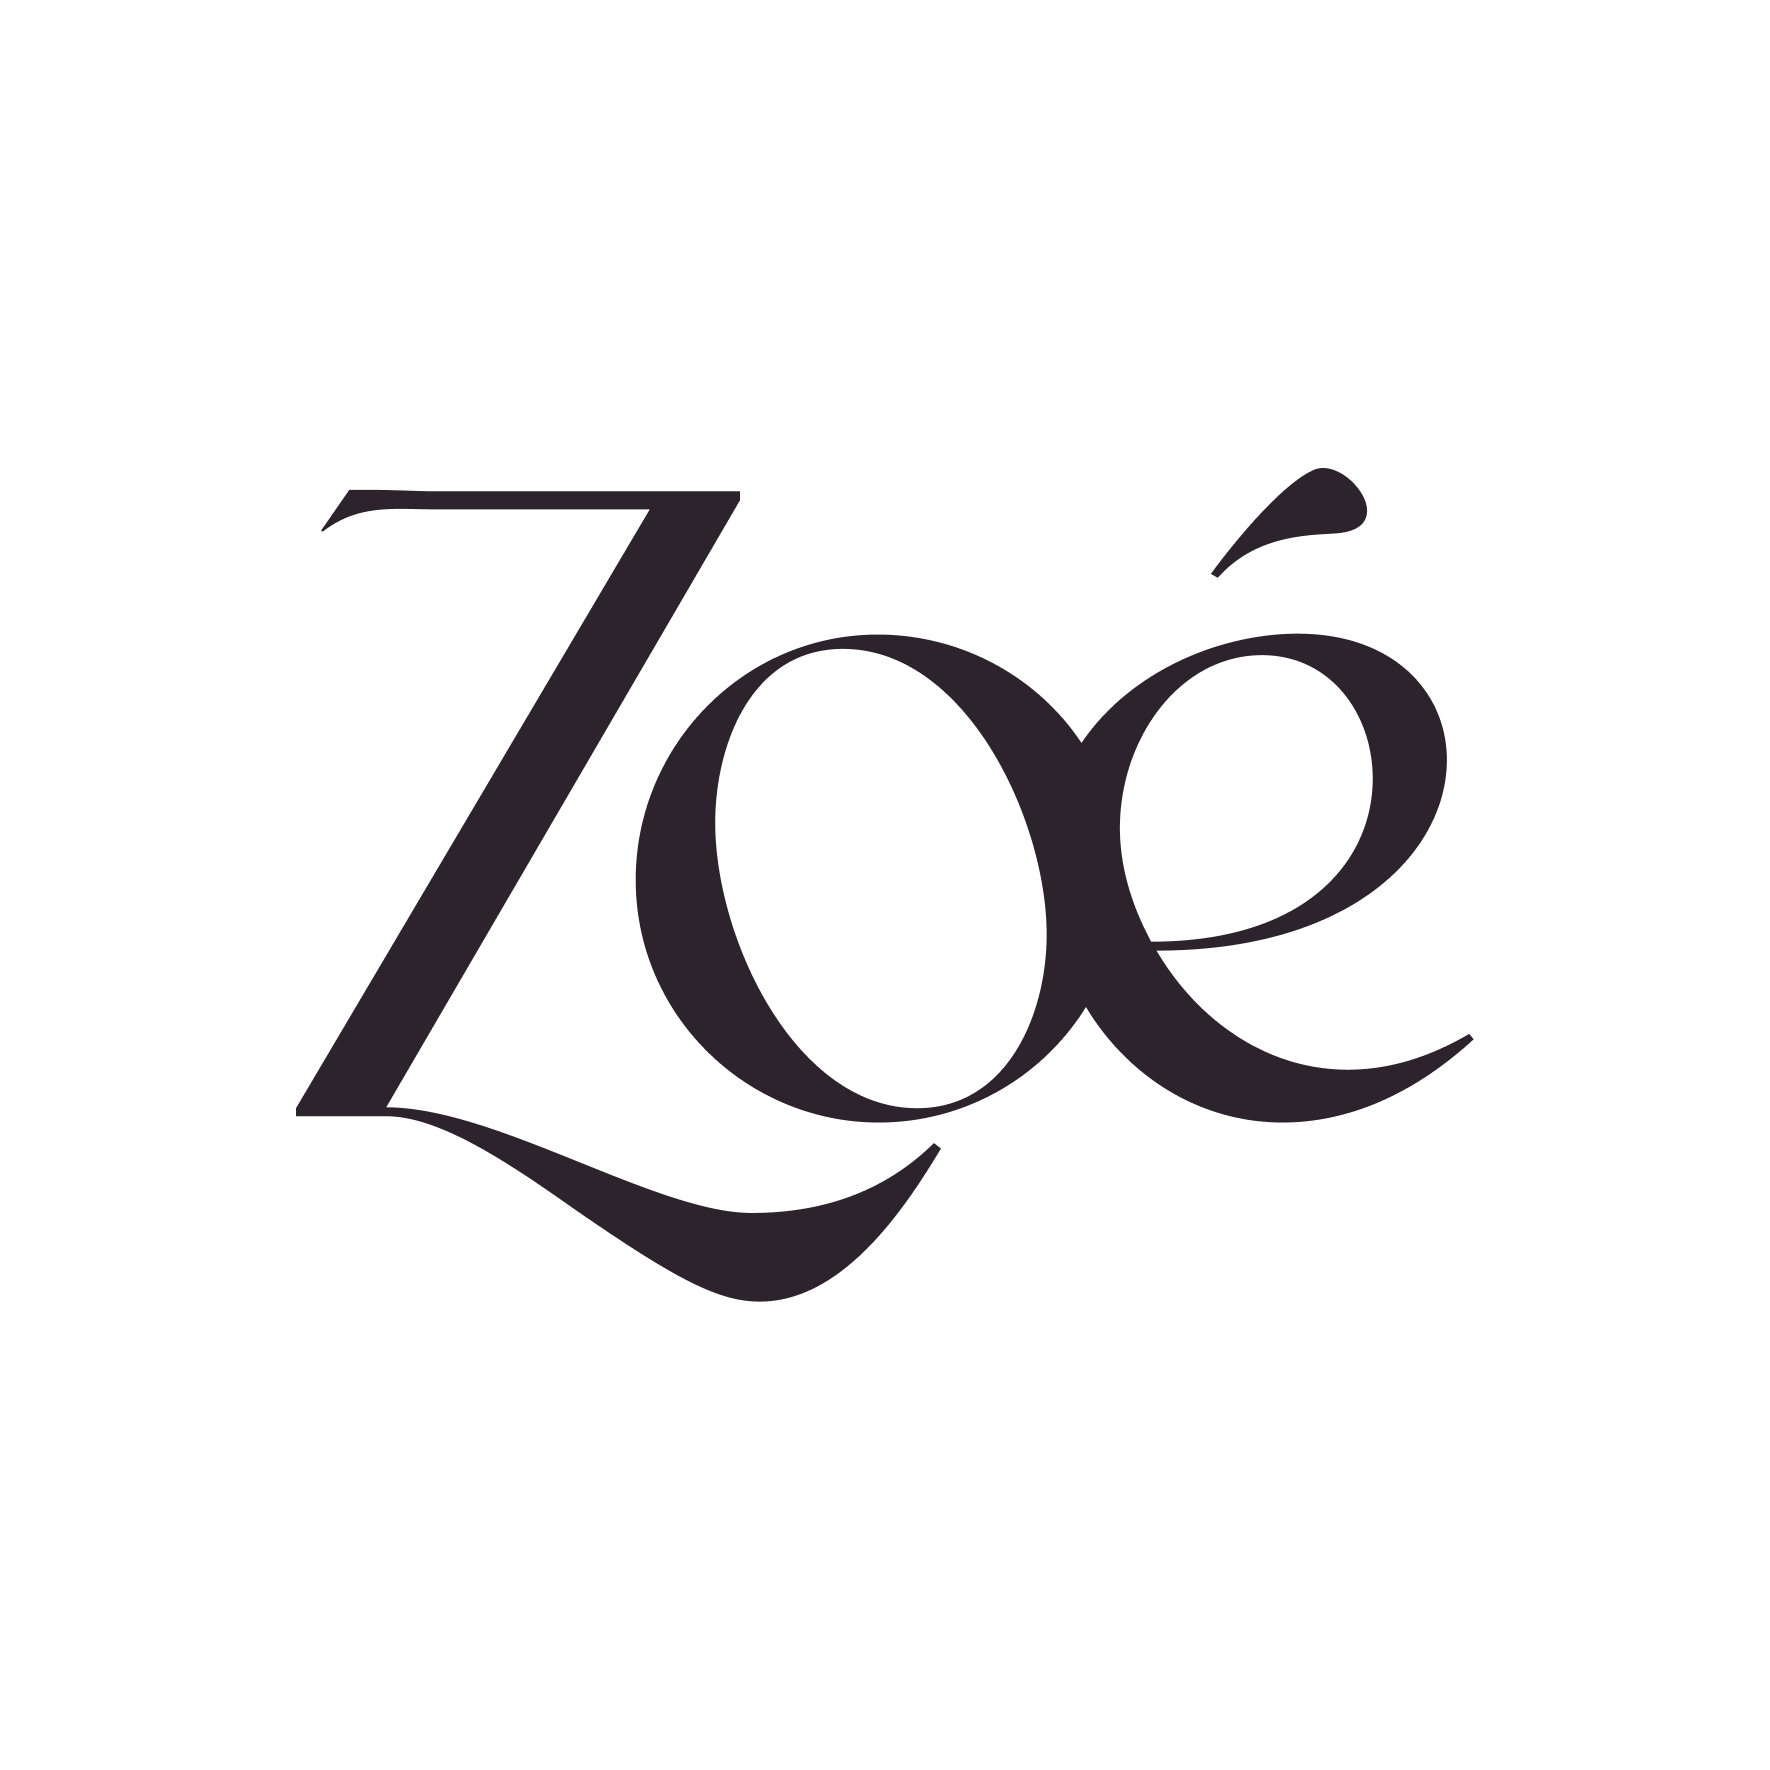 Join the Zoé Ecosystem | Zoé Garden Inc. (Powered by Donorbox)